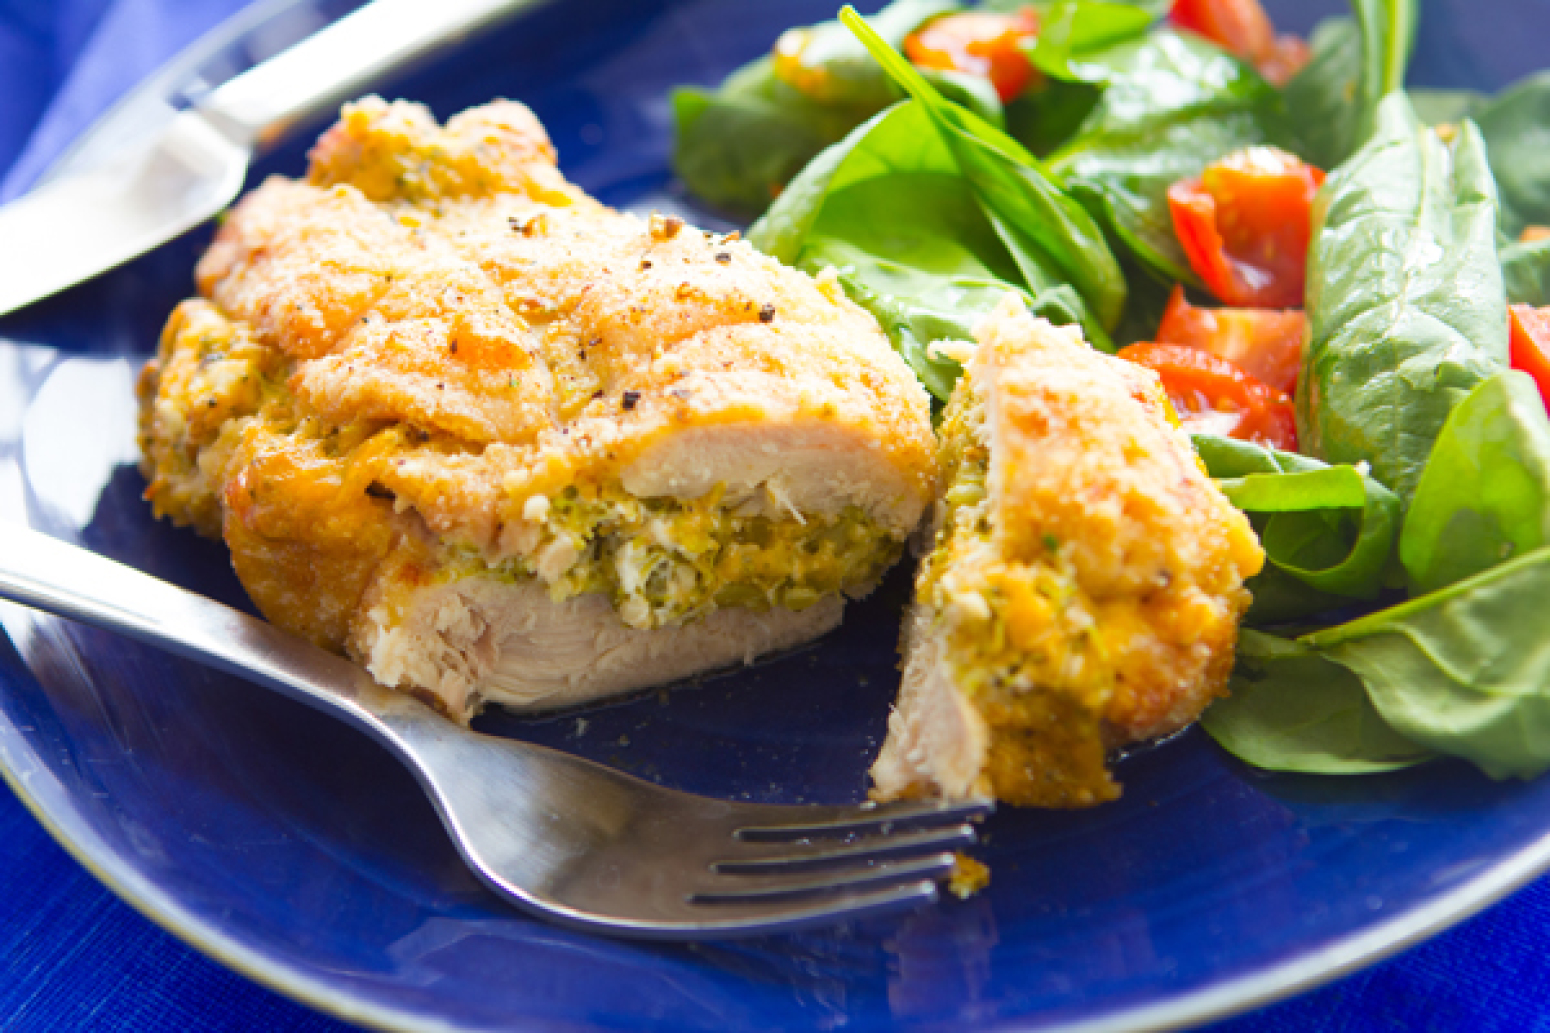 Broccoli and Cheese Stuffed Chicken That Low Carb Life